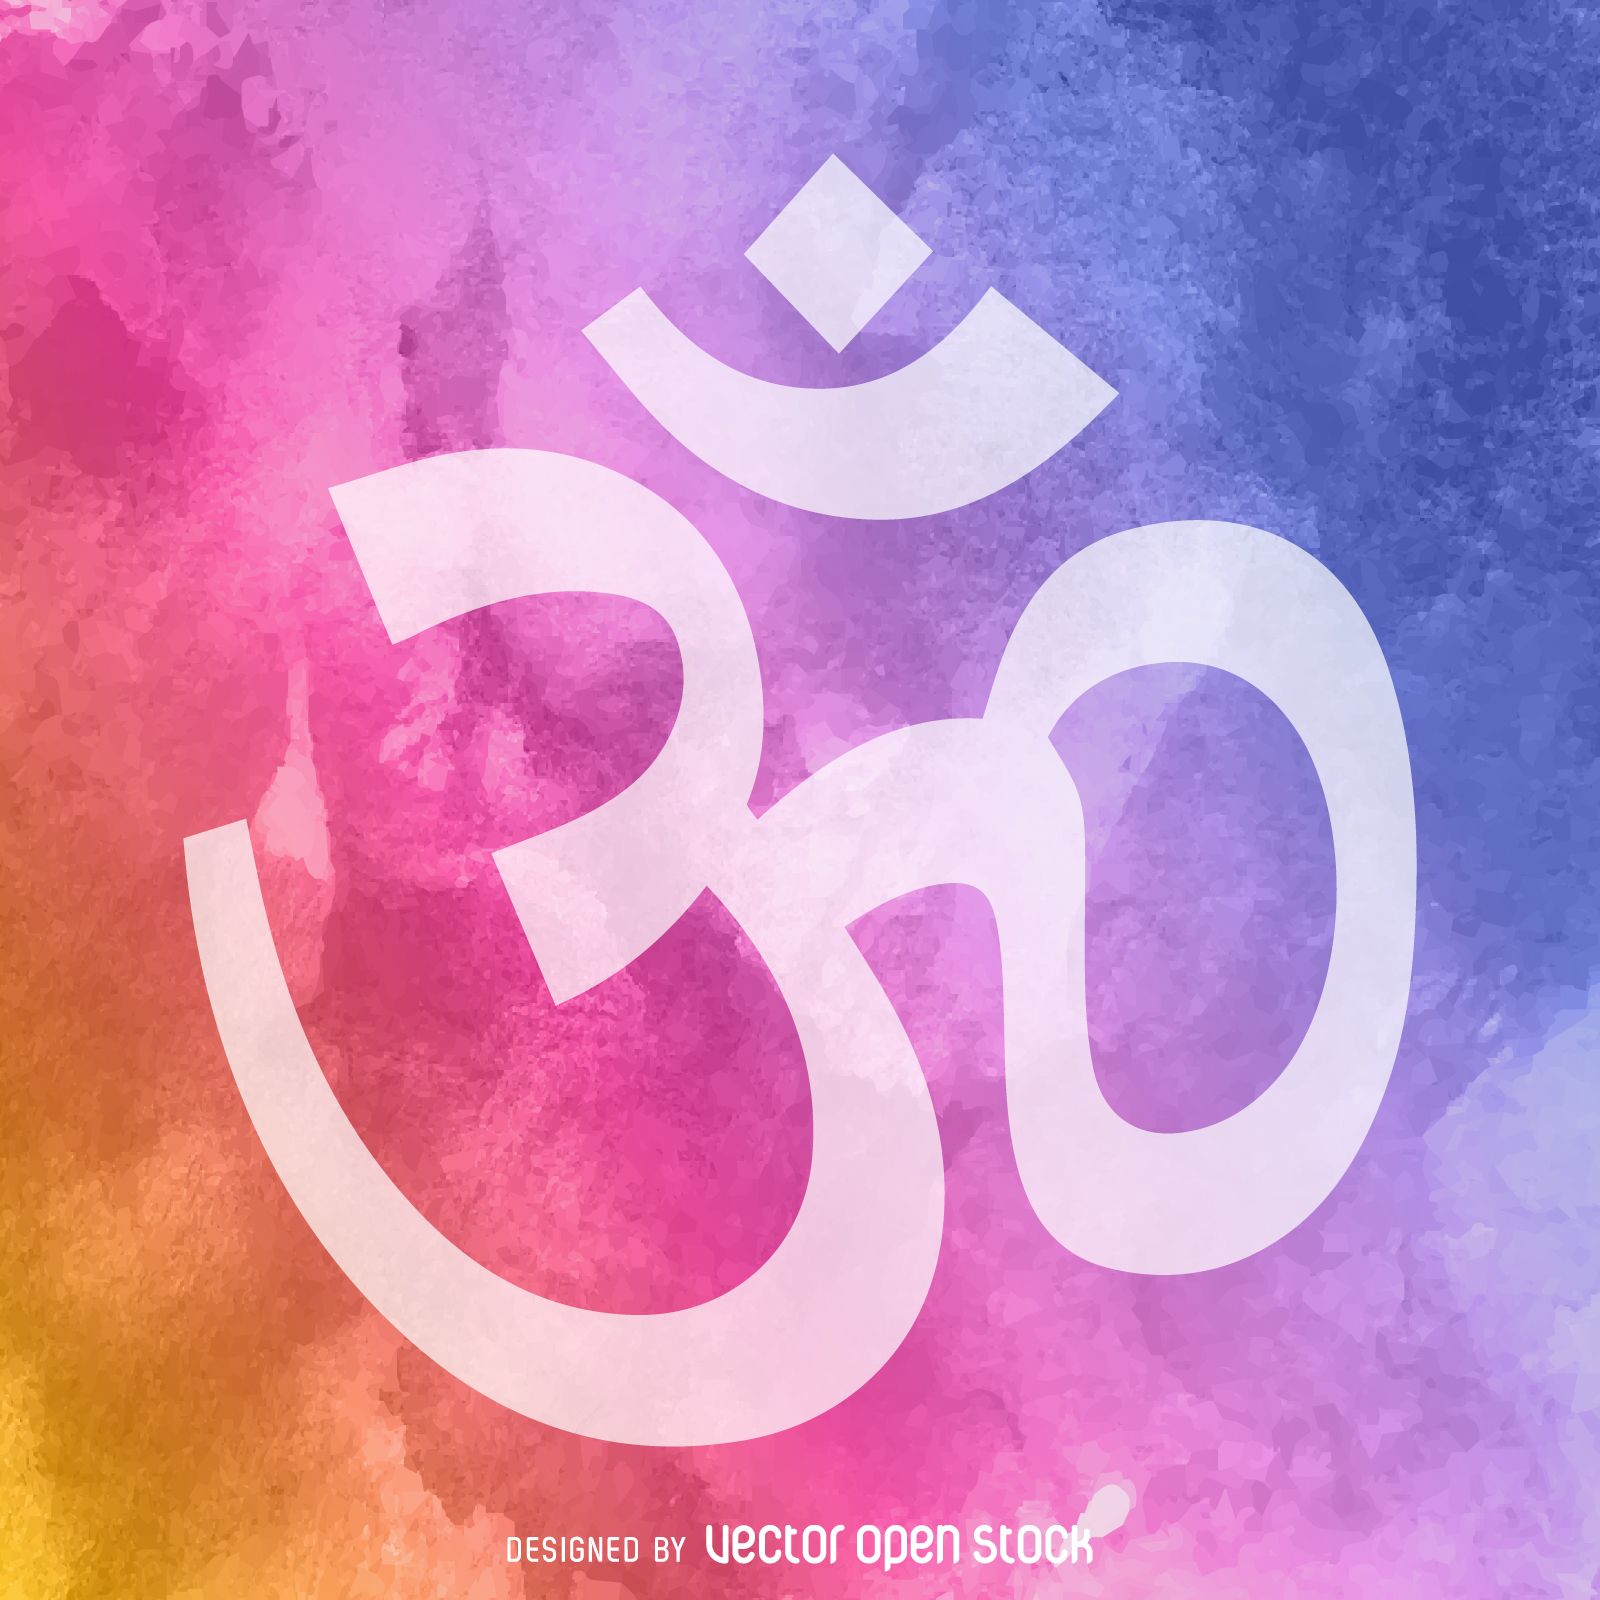 Design Featuring The Om Or Aum Sign In White Over A Watercolor